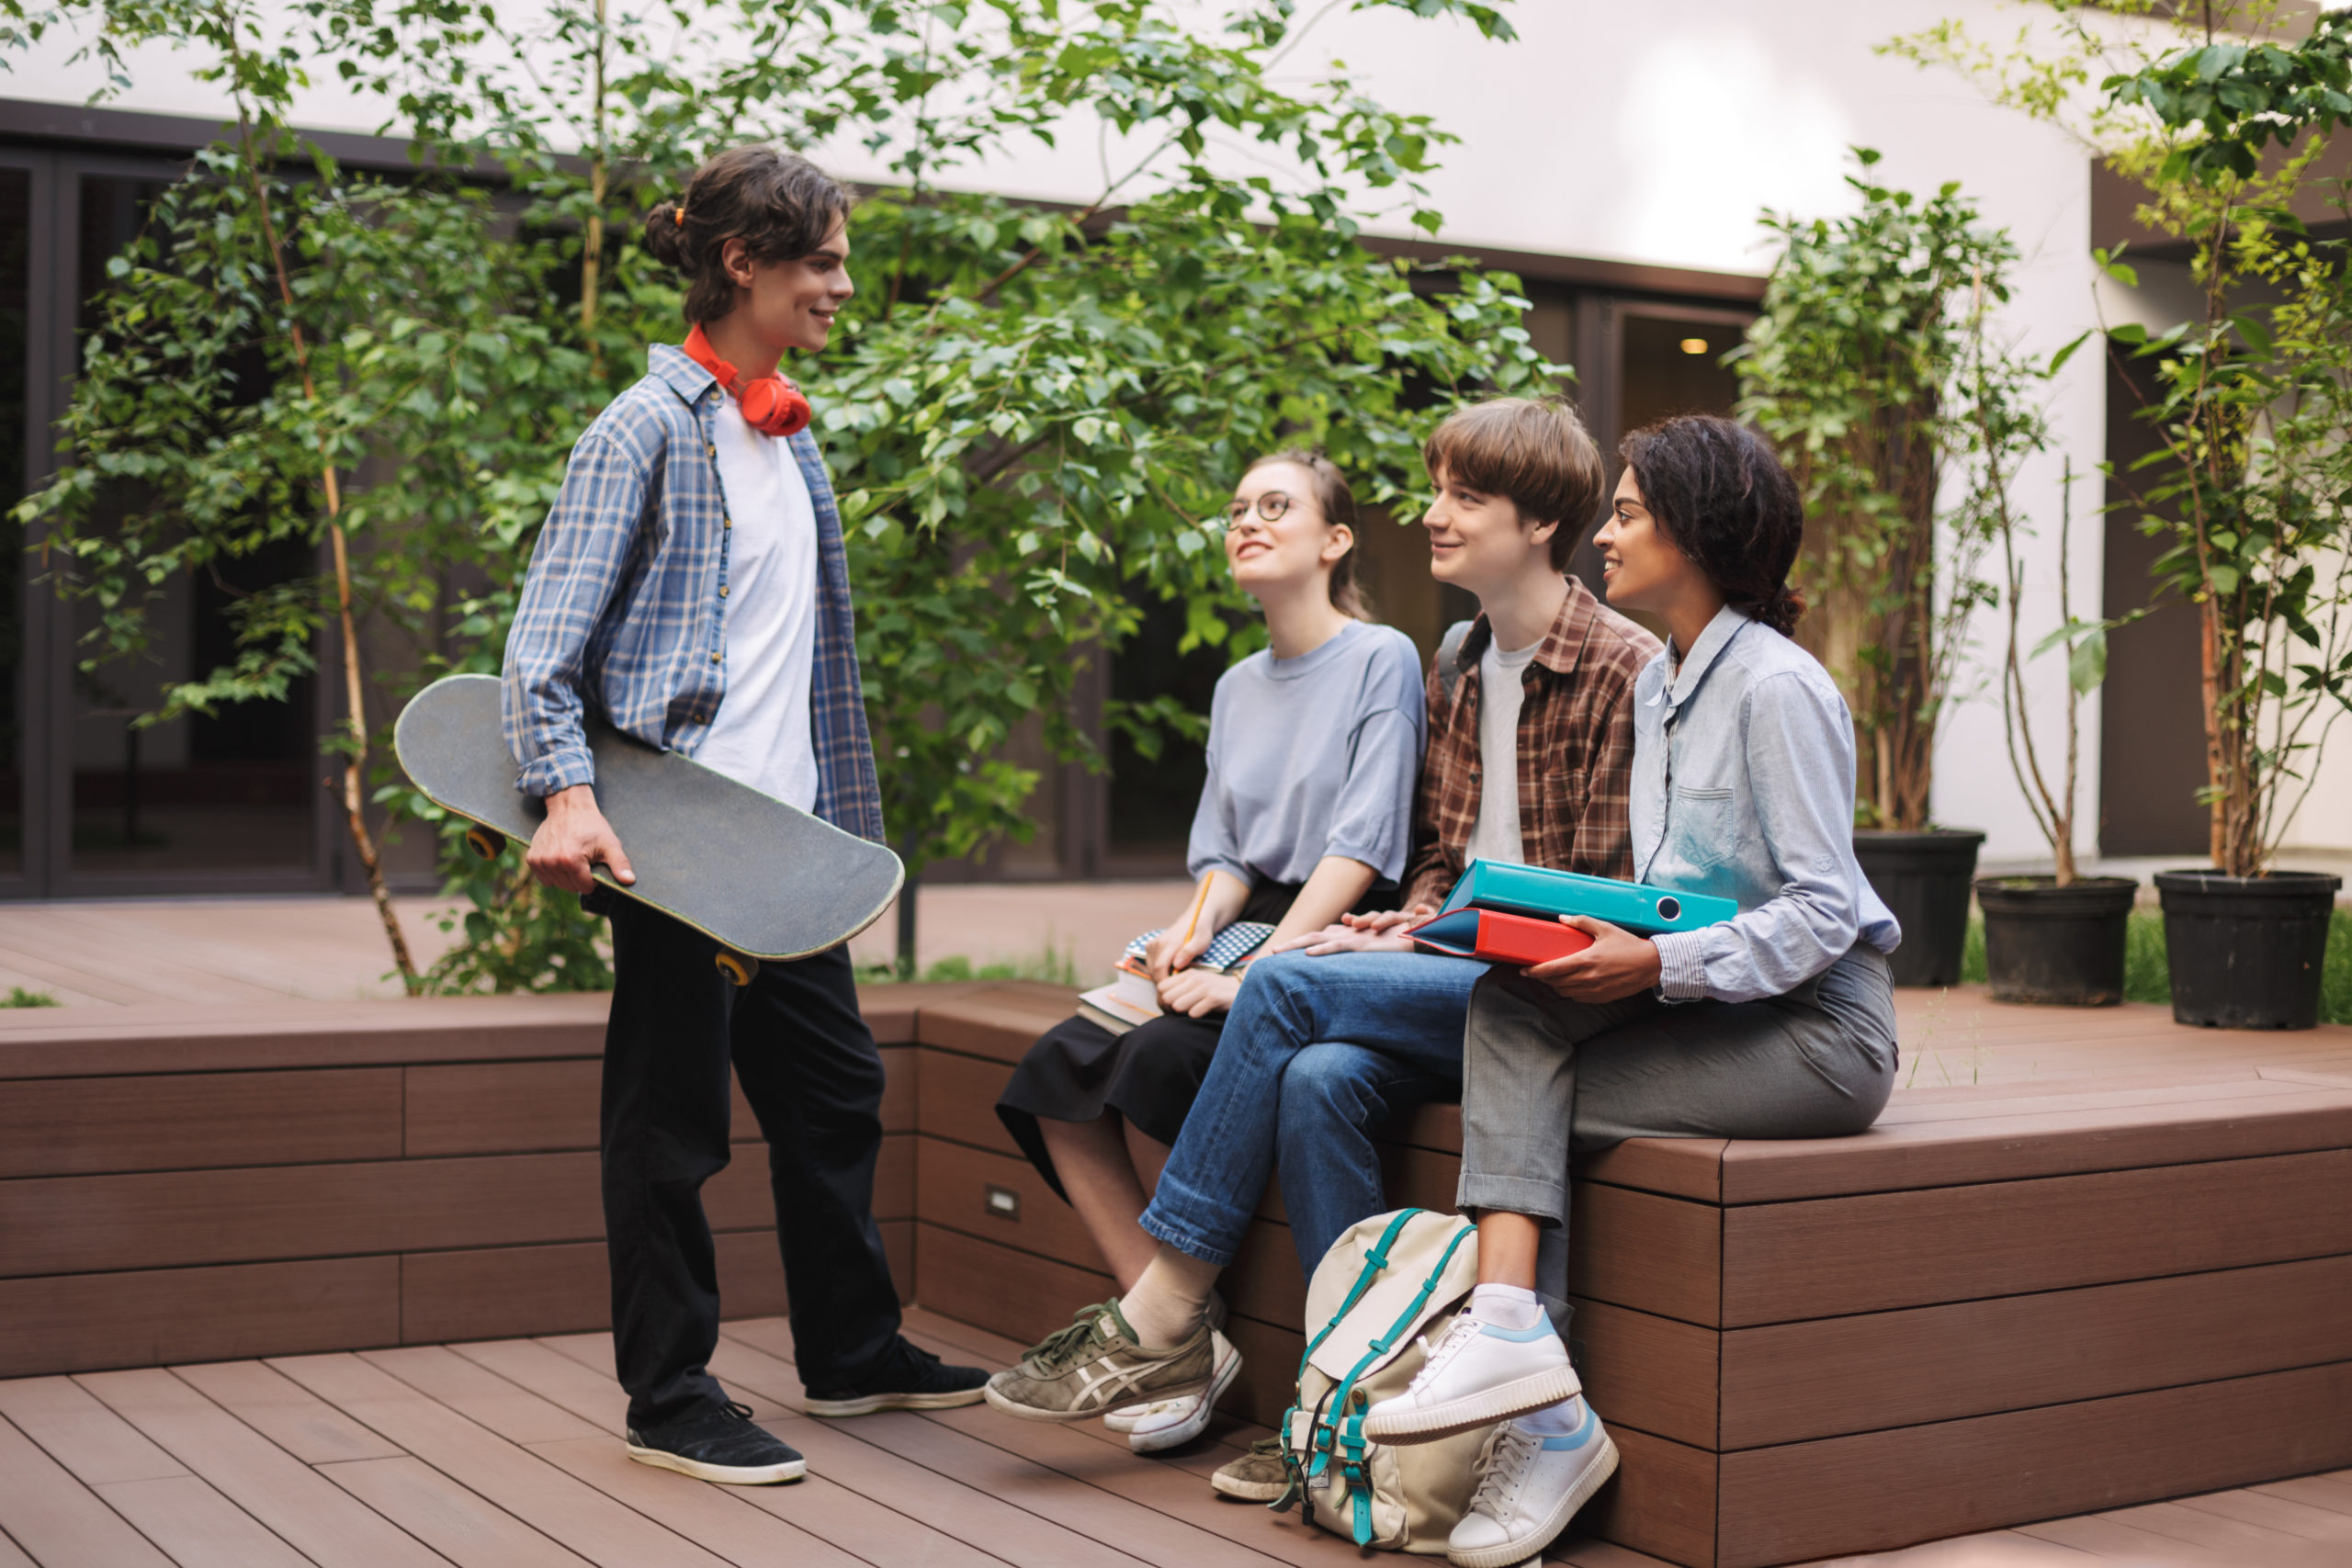 Group of young cool students sitting on bench and speaking while spending time together in courtyard of university